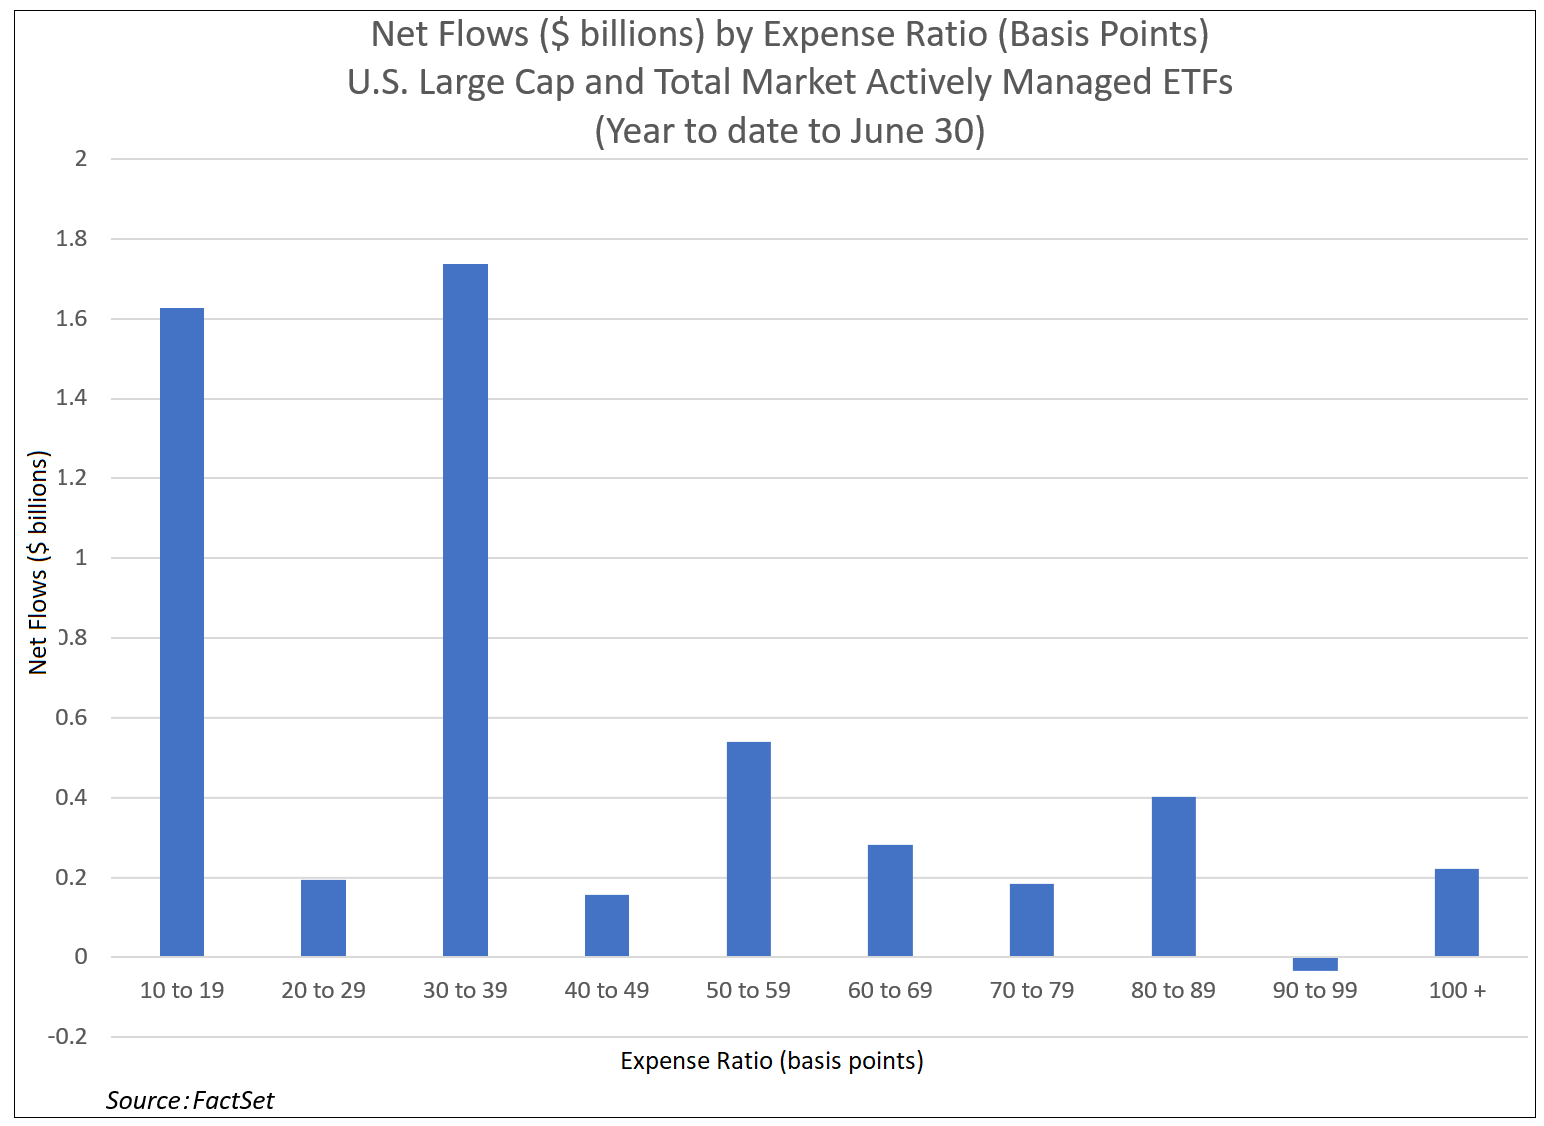 net-flows-by-expense-ratio-us-large-cap-and-total-market-actively-managed-etfs